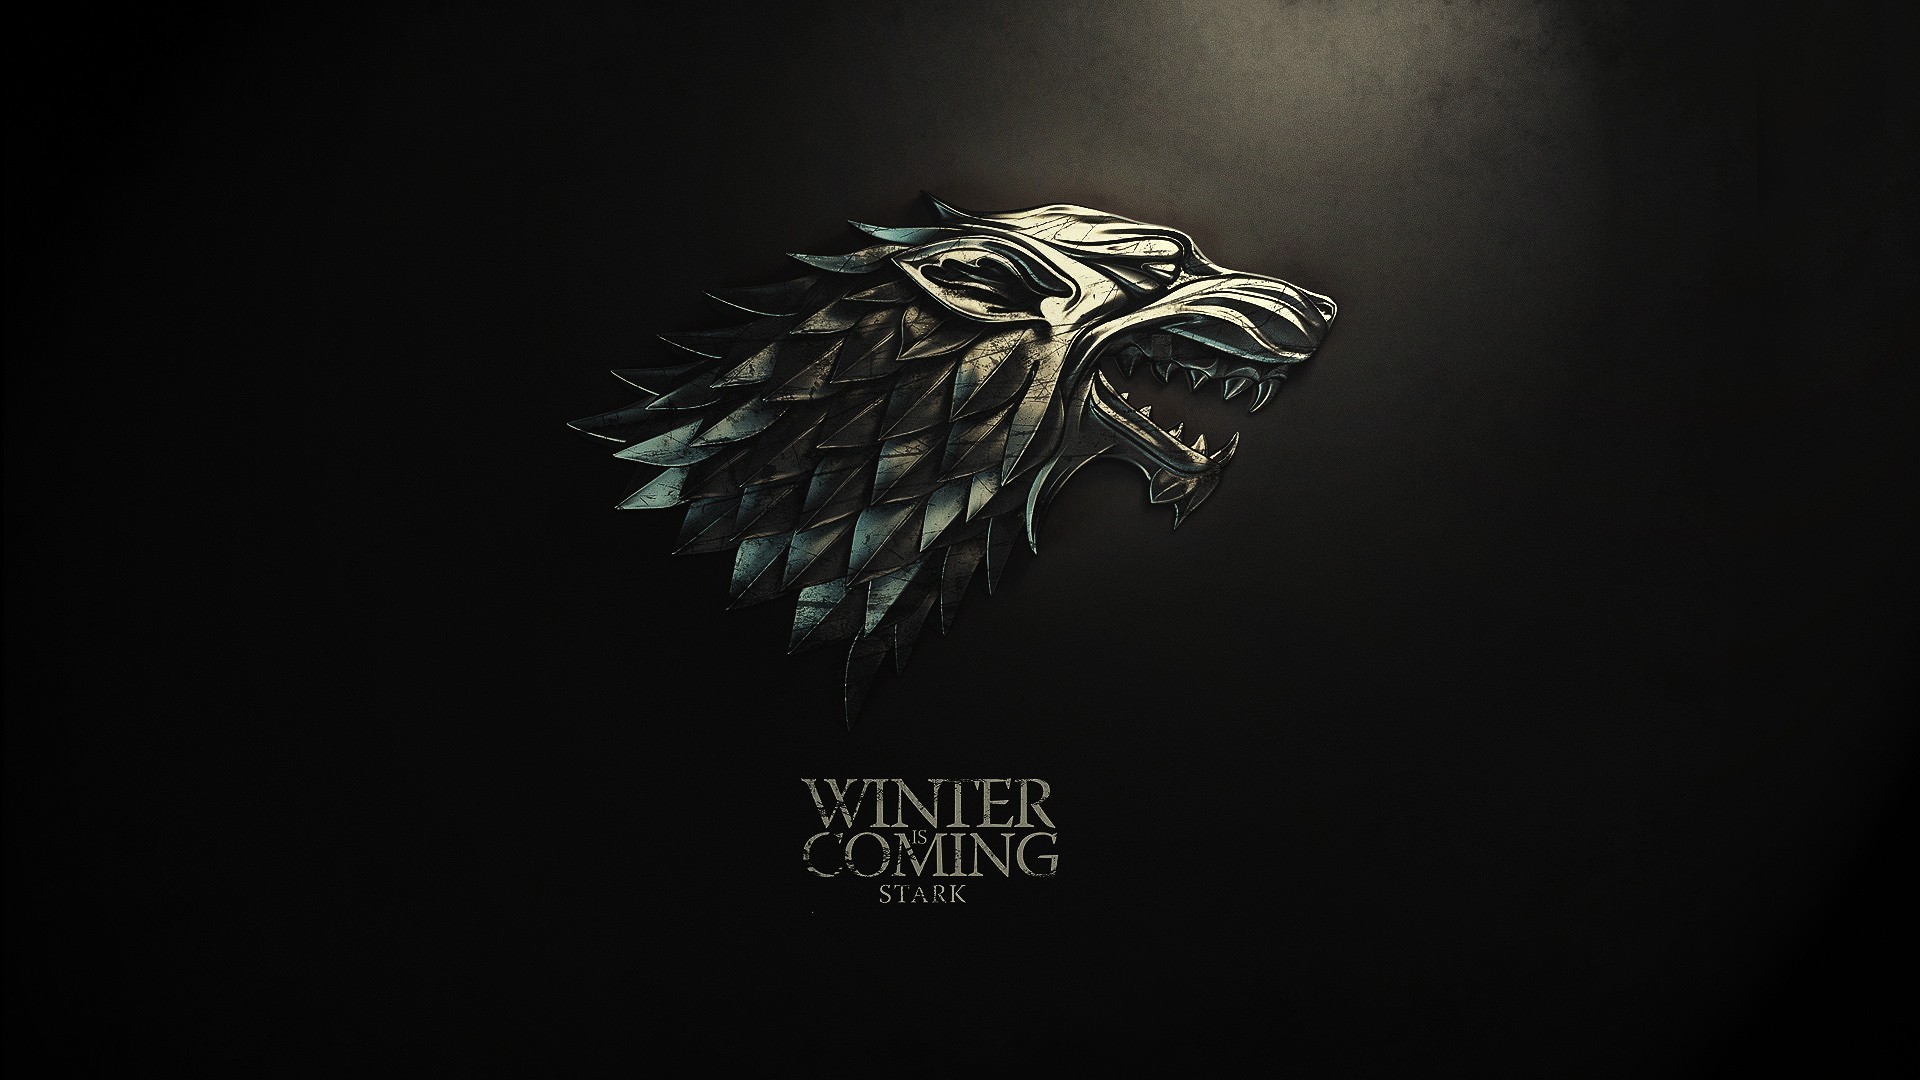 1920x1080 Game of Thrones House Stark Winter is Coming